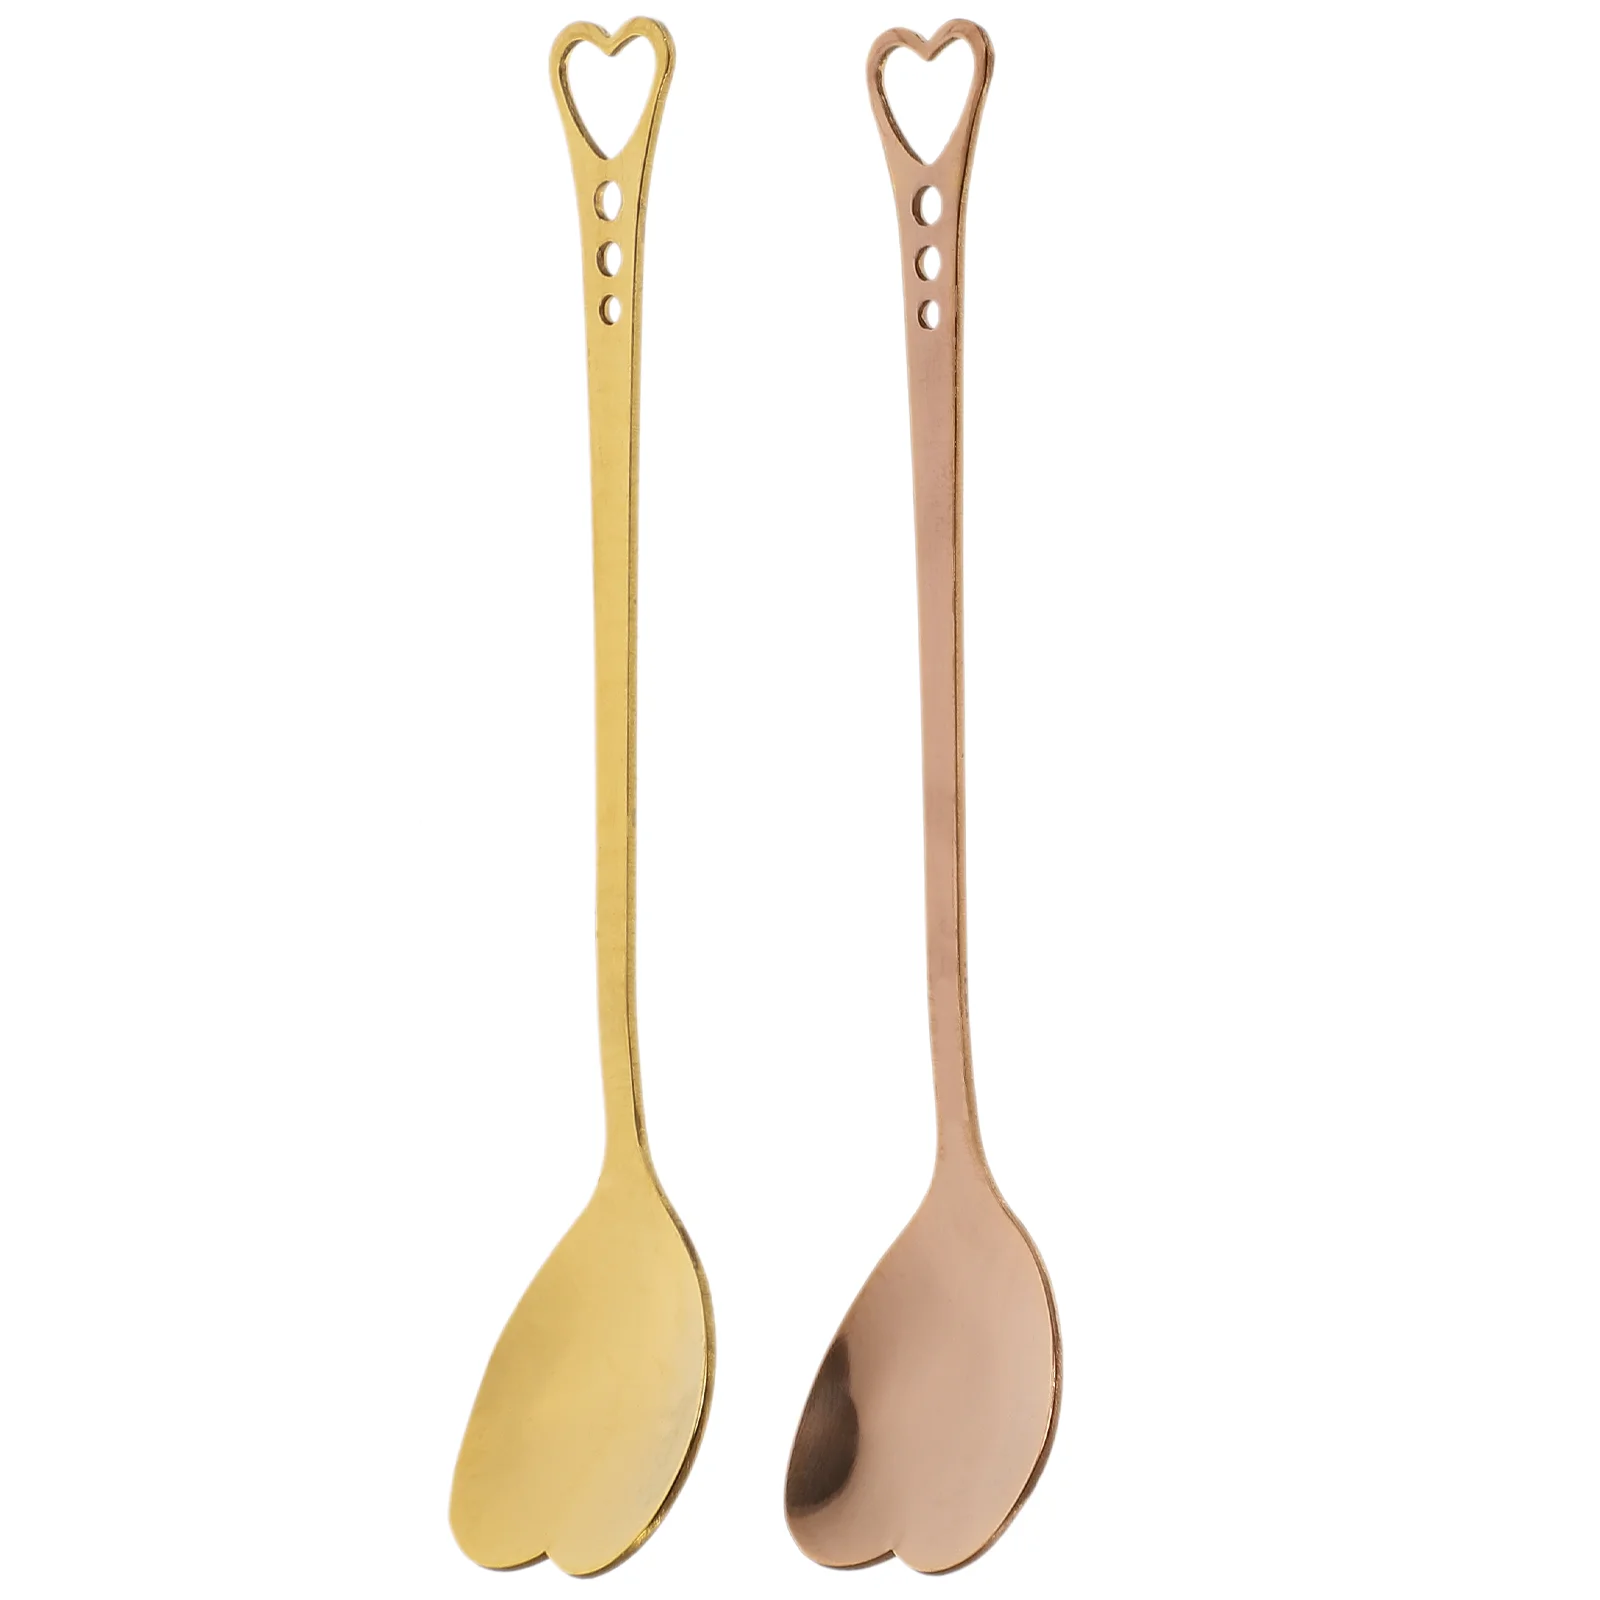 

2 Pcs Stainless Steel Spoon Gold Plating Heart Shaped Dessert Spoon Unique Charming Stirring Spoon Tableware Scoop for Home